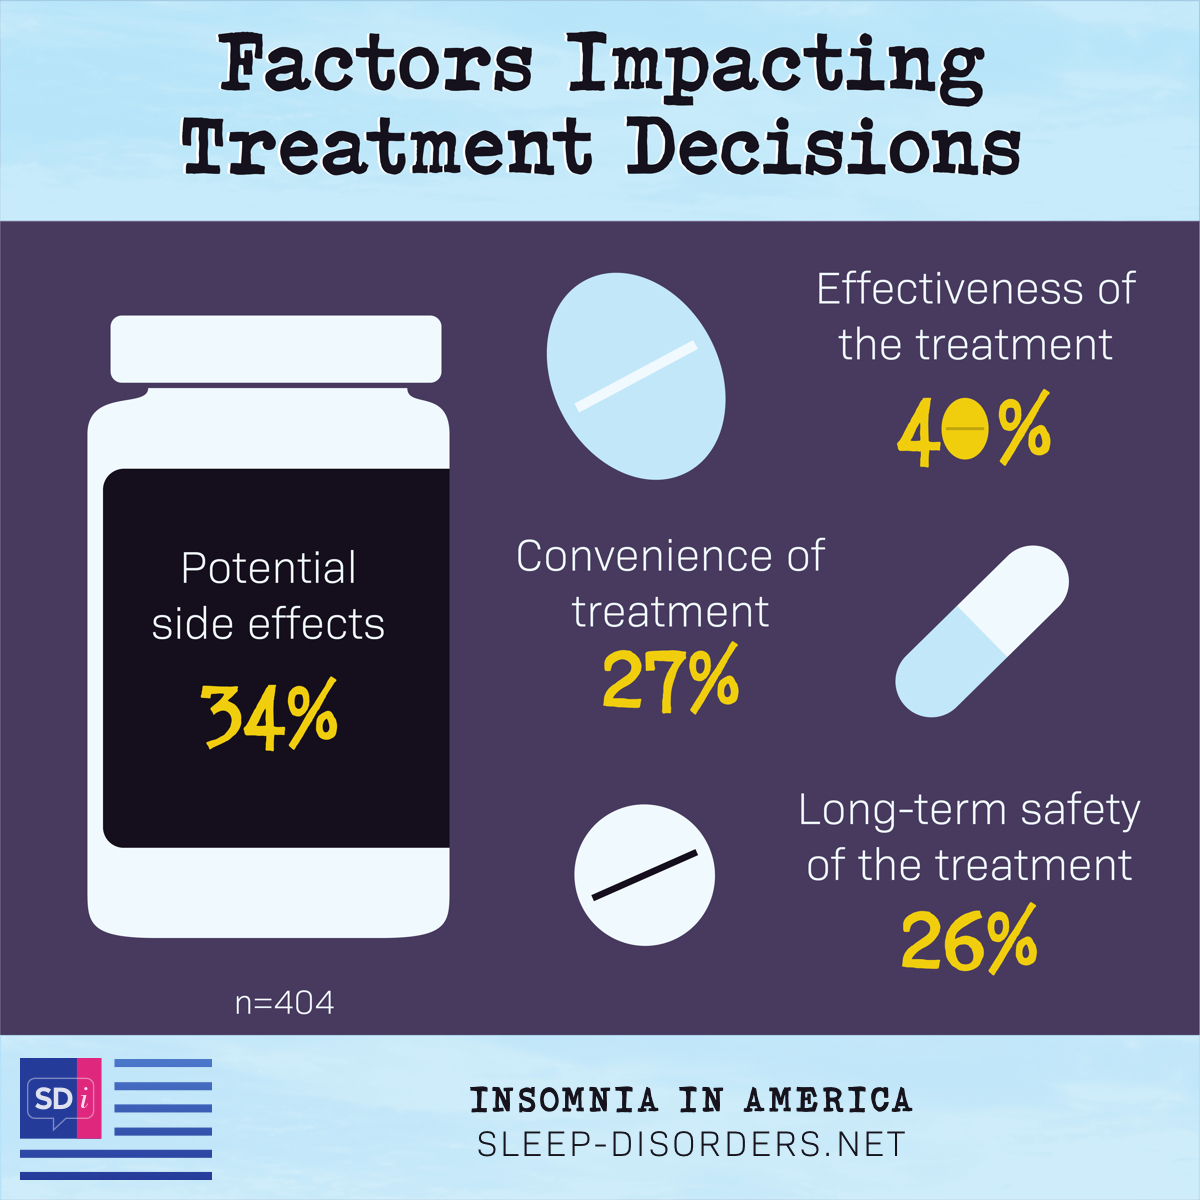 Many factors impact treatment decisions for insomnia including effectiveness of treatment (40%), potential side effects (34%), convenience of treatment (27%), and long term safety of the treatment (26%).